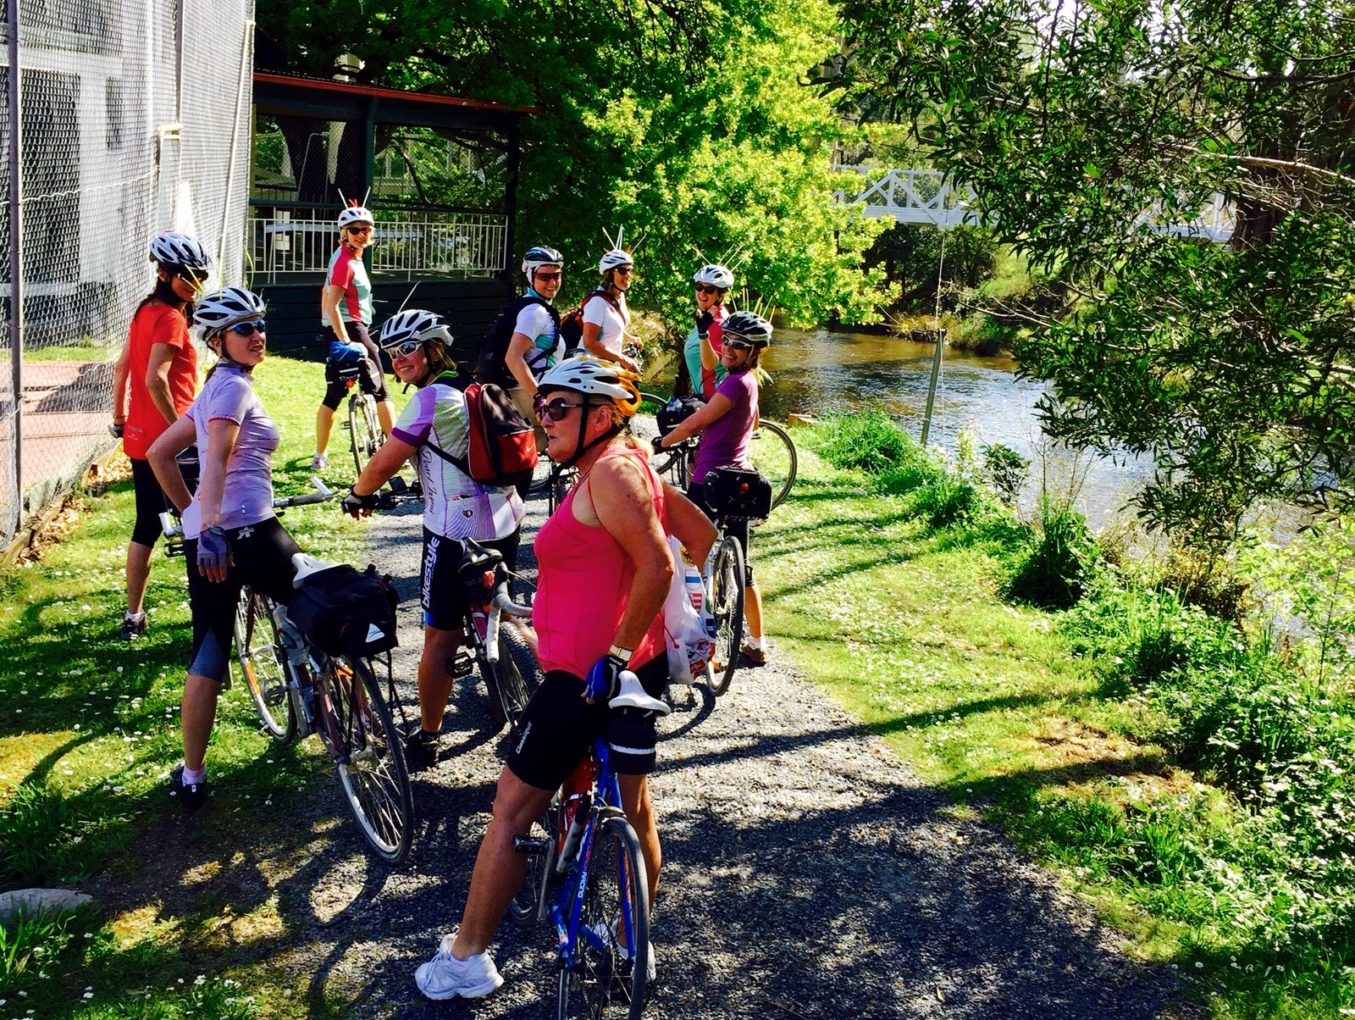 Another Melb Path on offer this week: Cycling from  Seville (Lilydale) -Warburton Trail